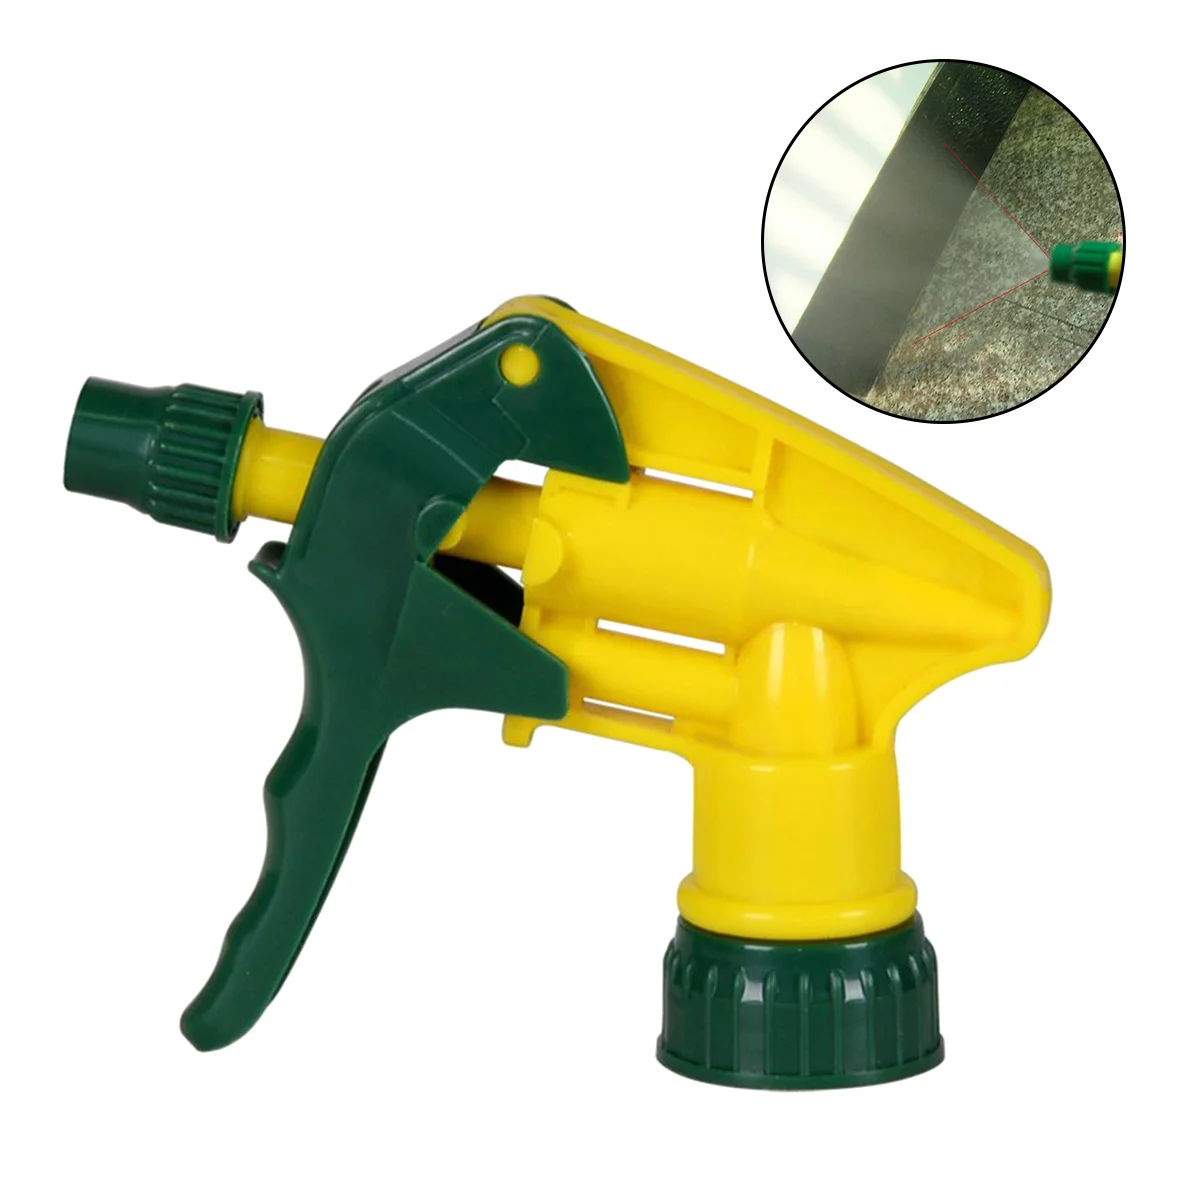 

Trigger Sprayer Disinfectant Spray Heads Spray Bottle Replacement Heads Pump Heads For Garden Watering Random Color